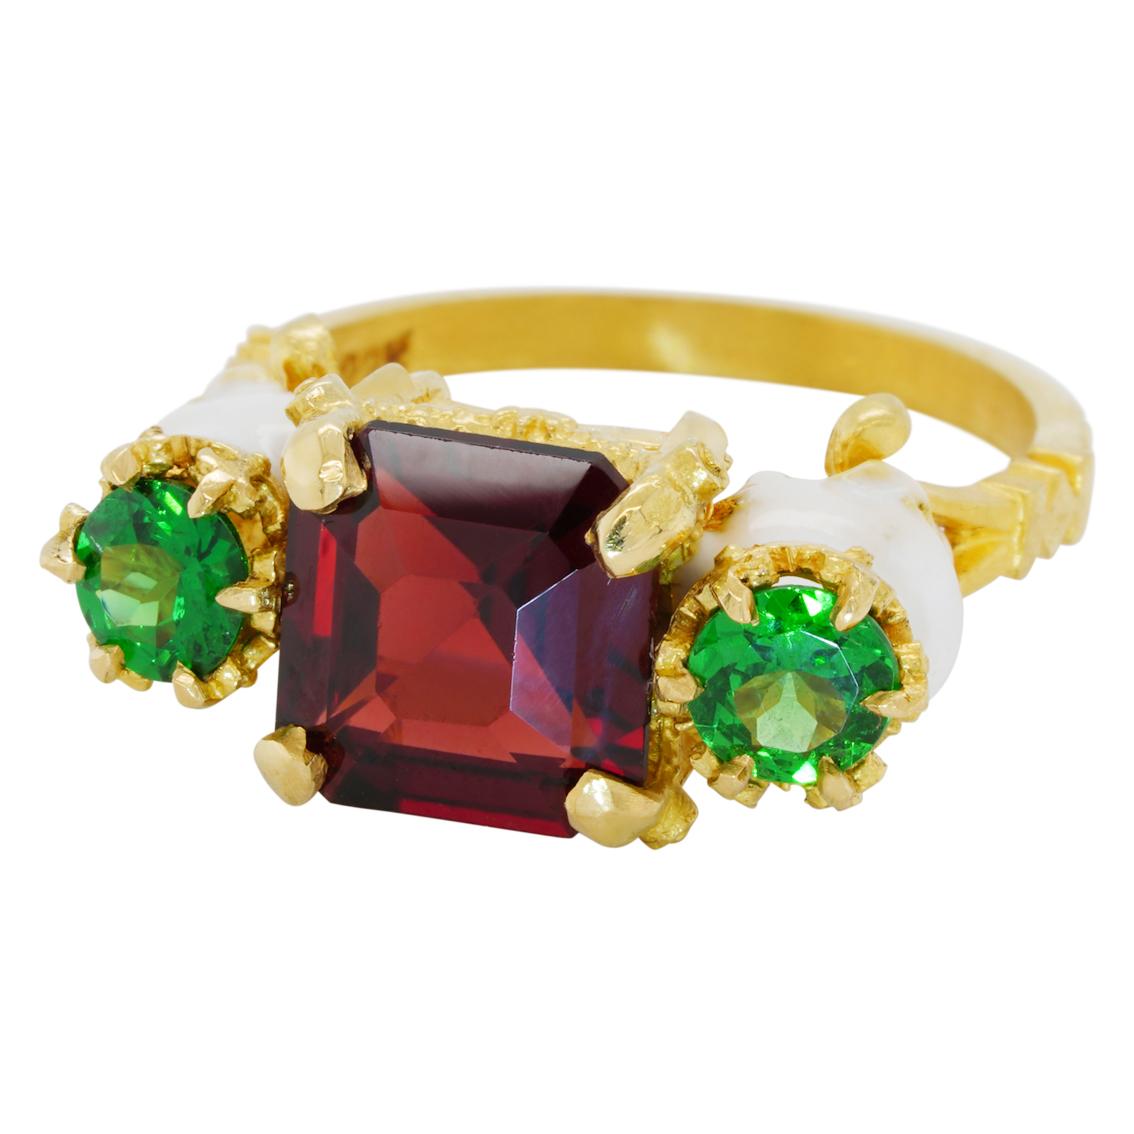 Square Cut Catacomb Saints Garland Ring in 22 Karat Gold with Red and Tsavorite Garnets